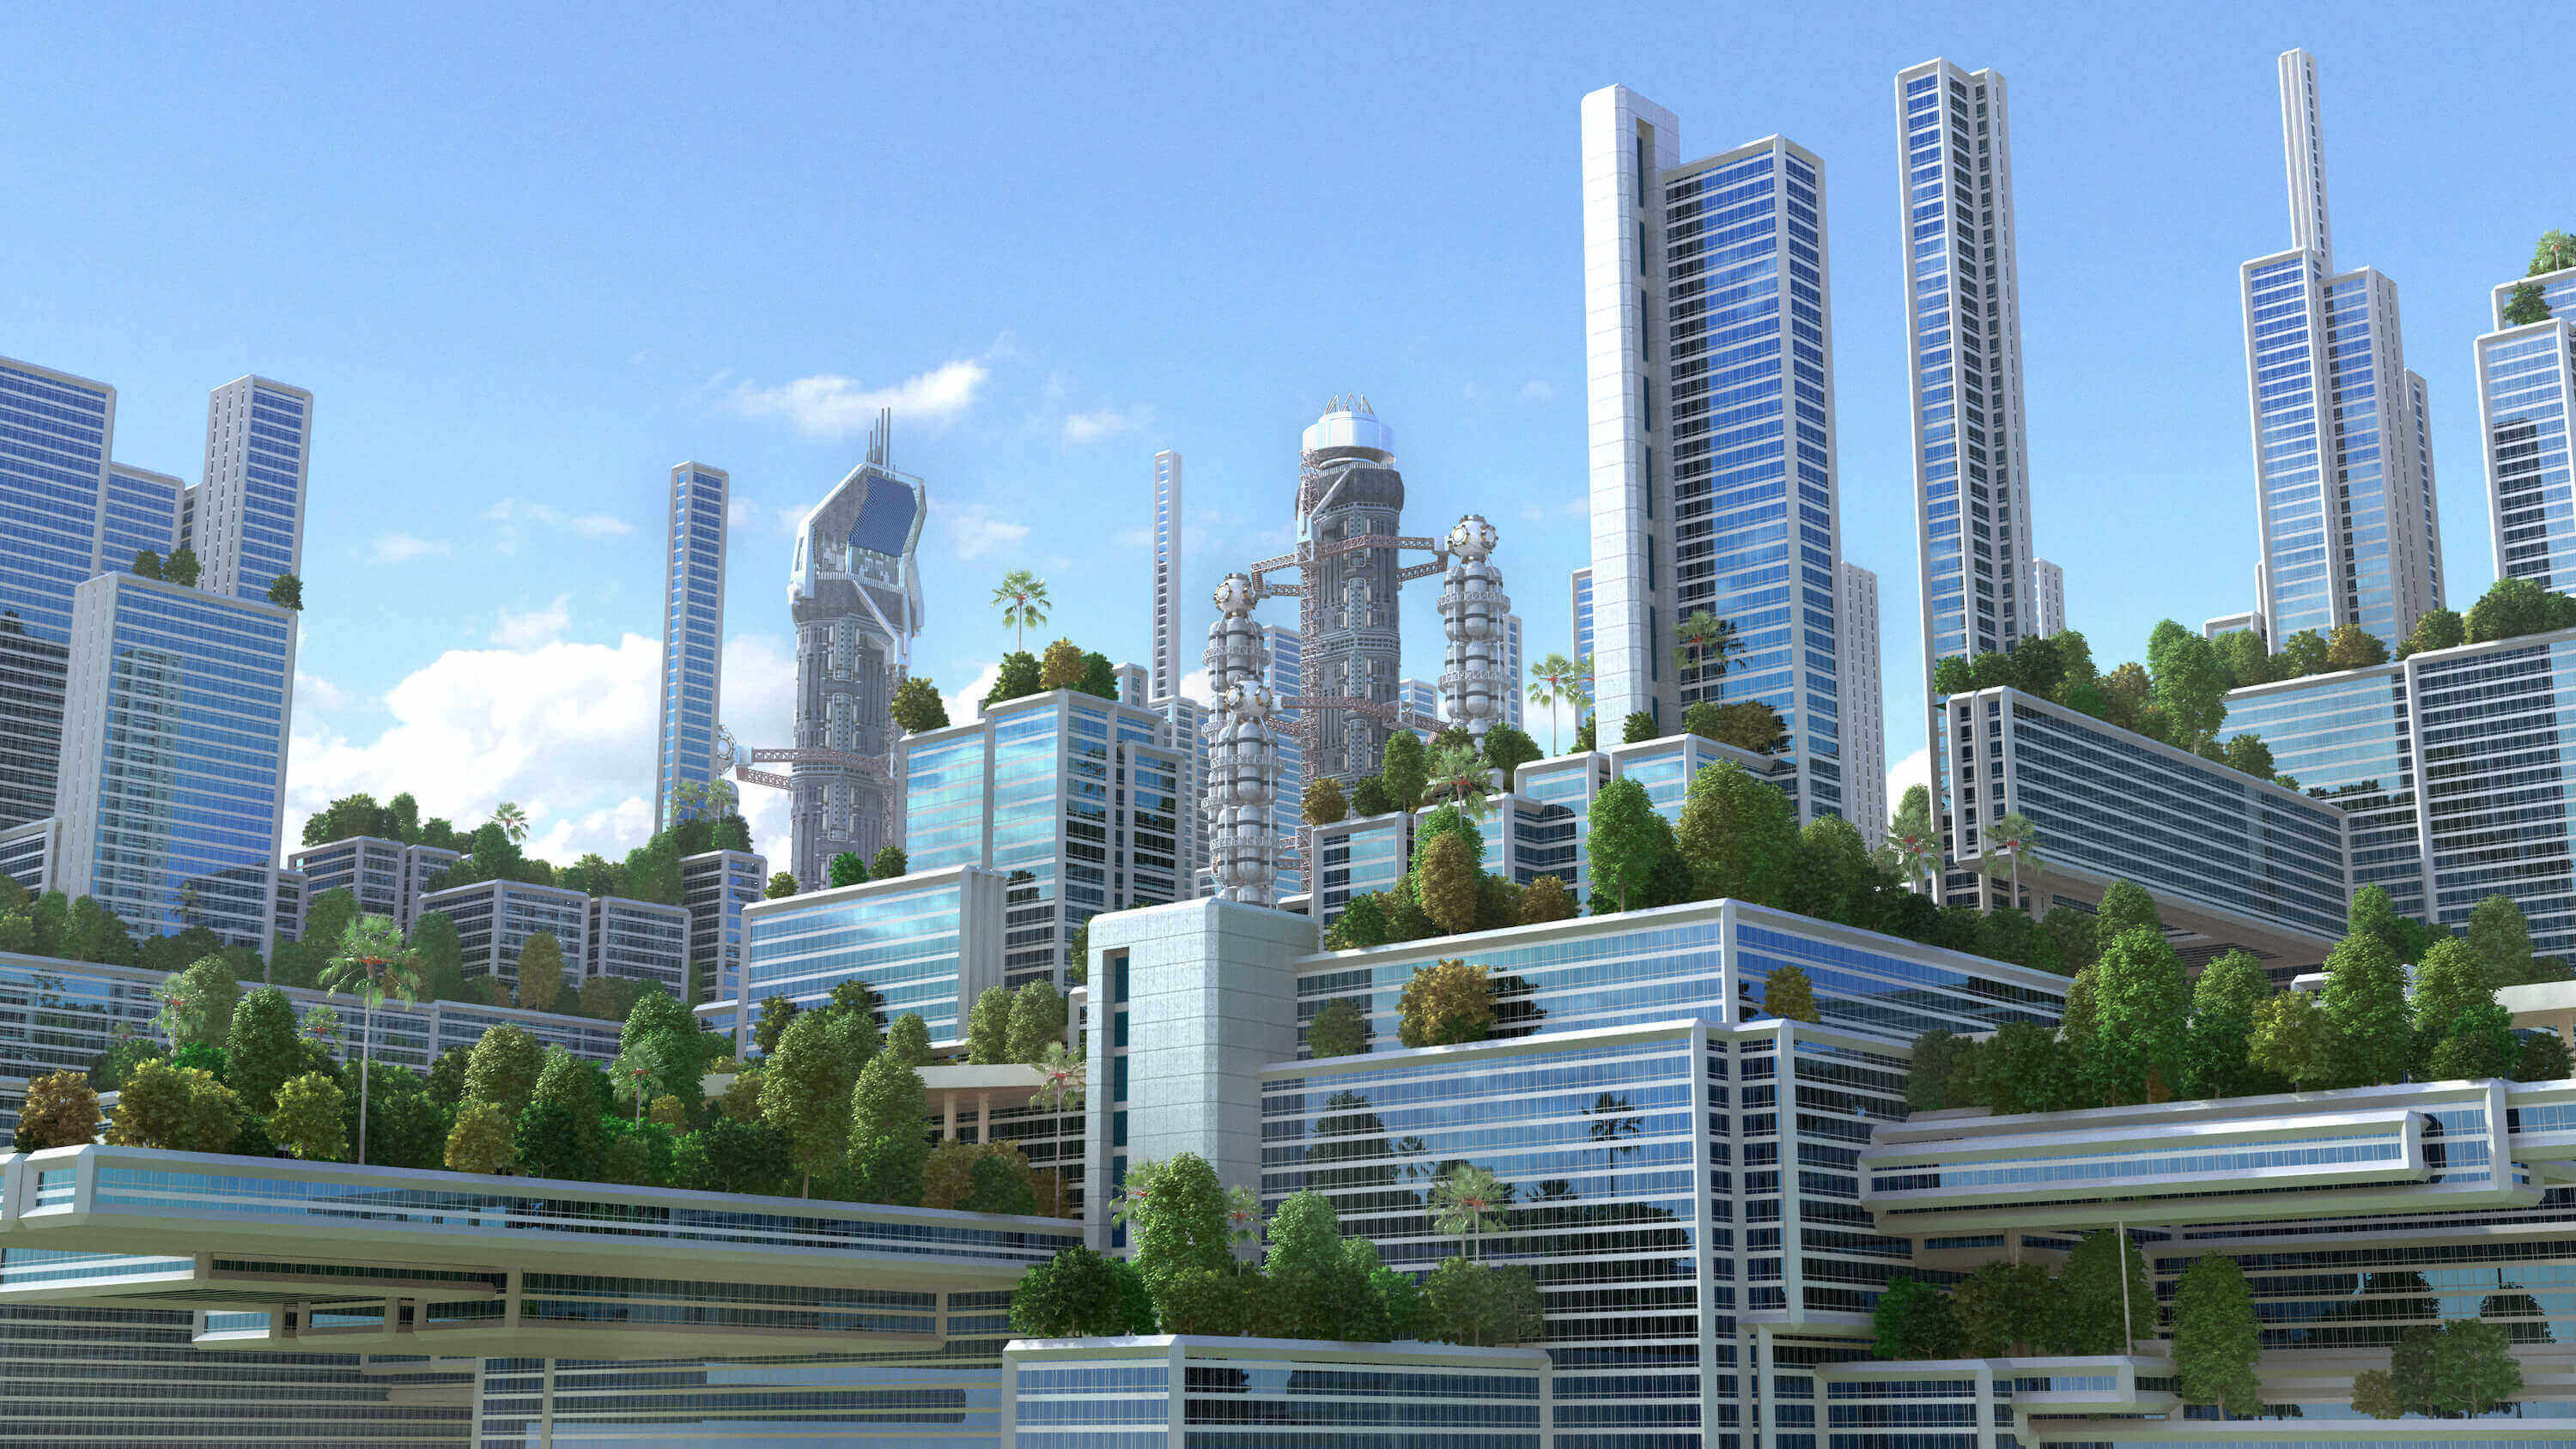 A futuristic "green" city with high rise buildings and terraces covered in vegetation